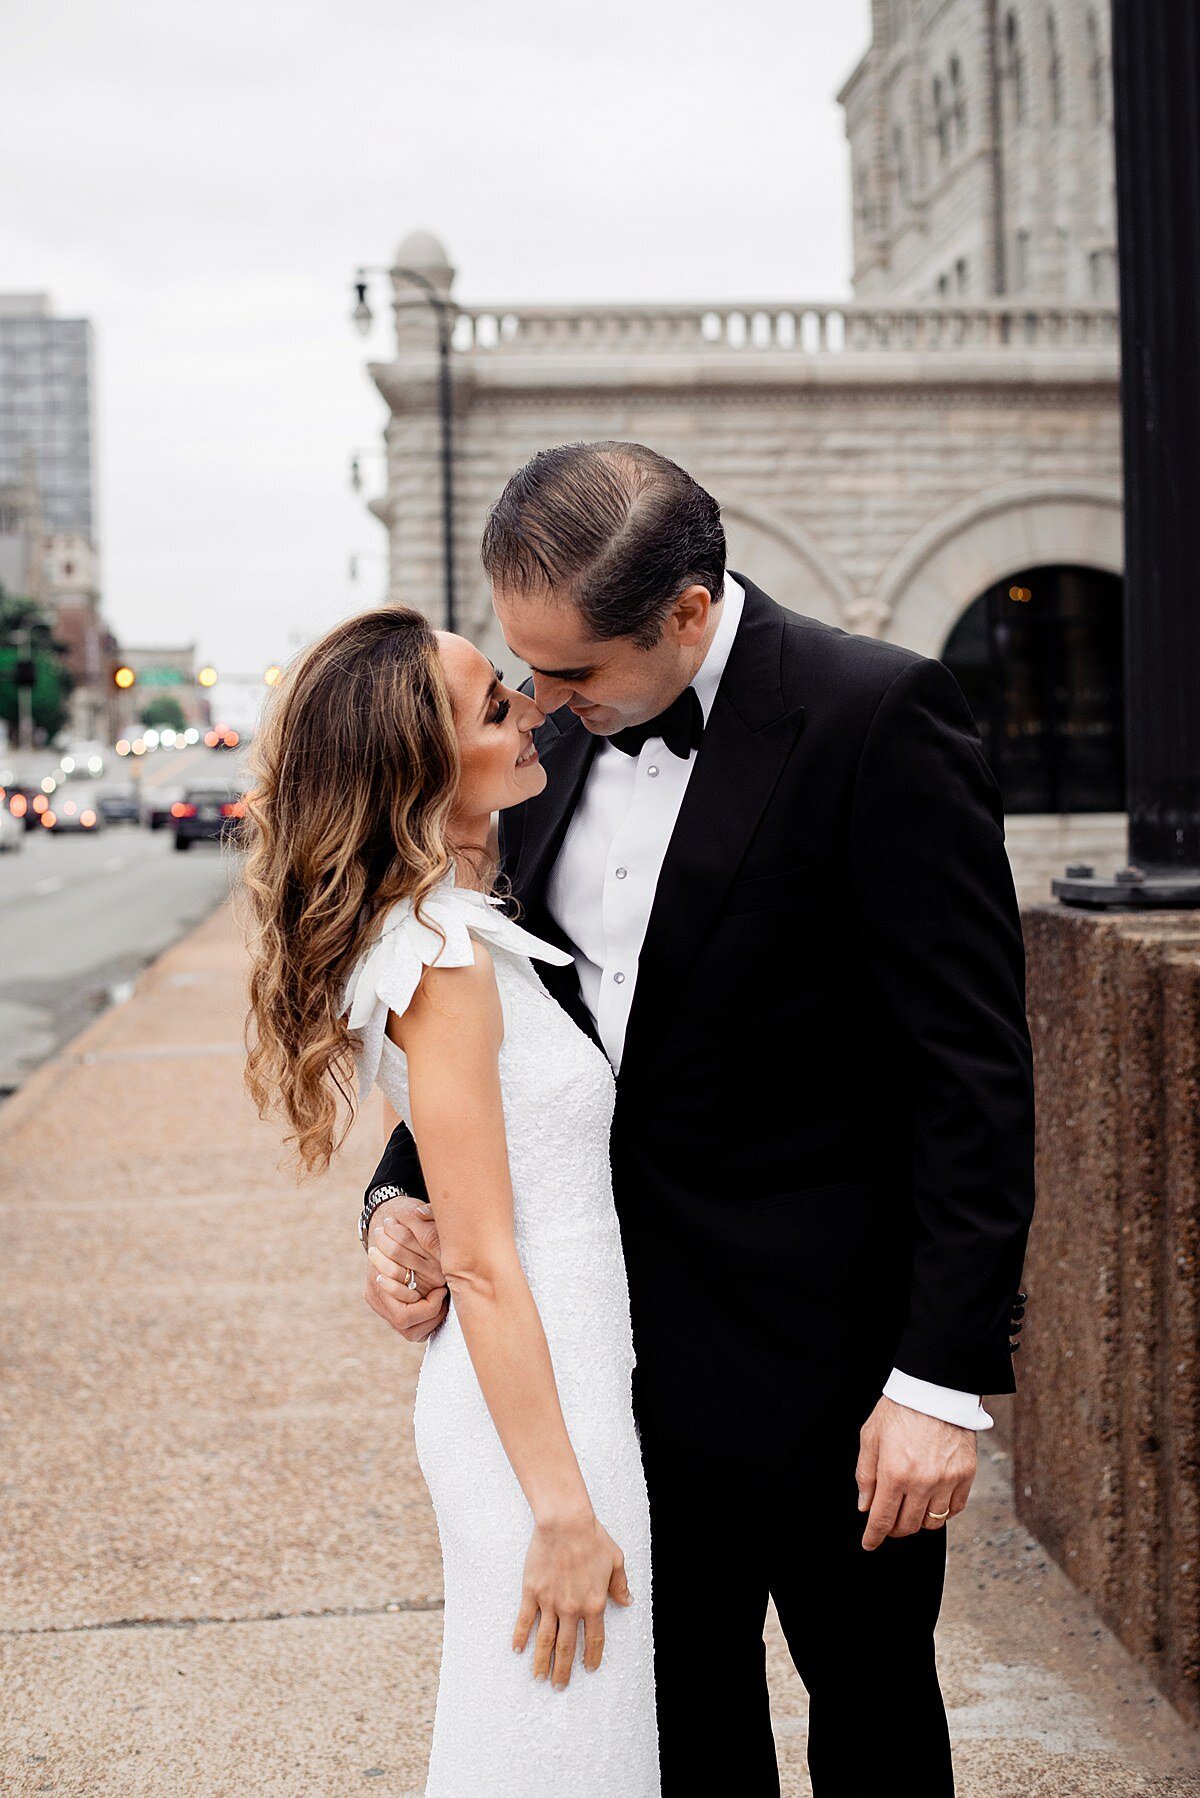 The groom leans in for a kiss as he wraps one arm around the bride's waist. They are standing outside of historic Union Station in Nashville. The bride is wearing a one shoulder sheath dress with a ruffle over her shoulder. The groom is wearing a black tuxedo with a white shirt and black bowtie.